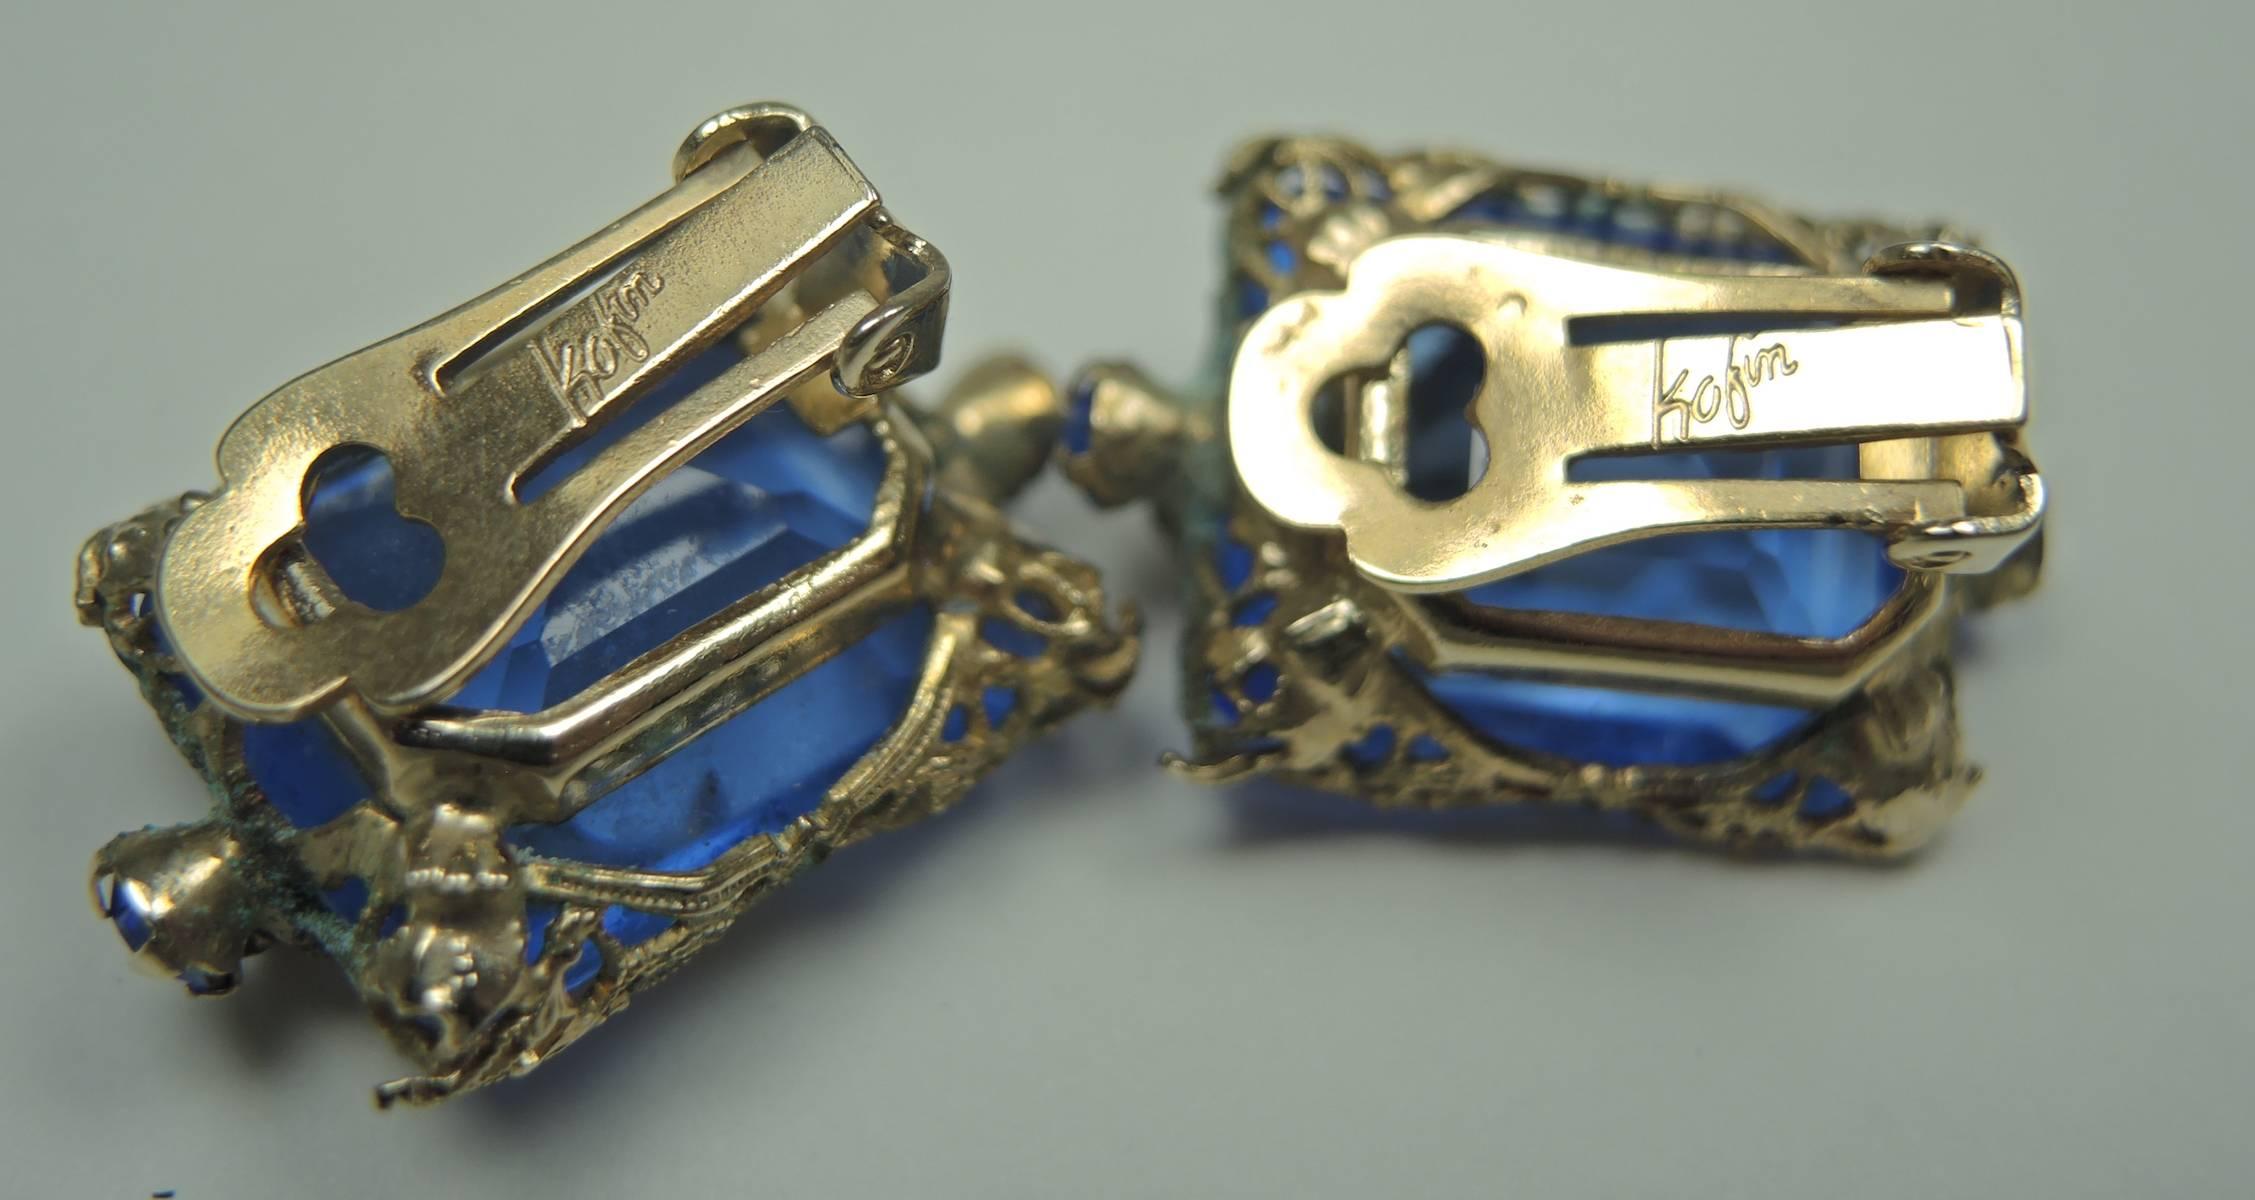 Kafin makes stunning jewelry and we thought, at first glance, they might be real cause they just have that money look.  These beautiful clip earrings feature a rectangular faux faceted sapphire stone with a golden floral leaf in the front. The